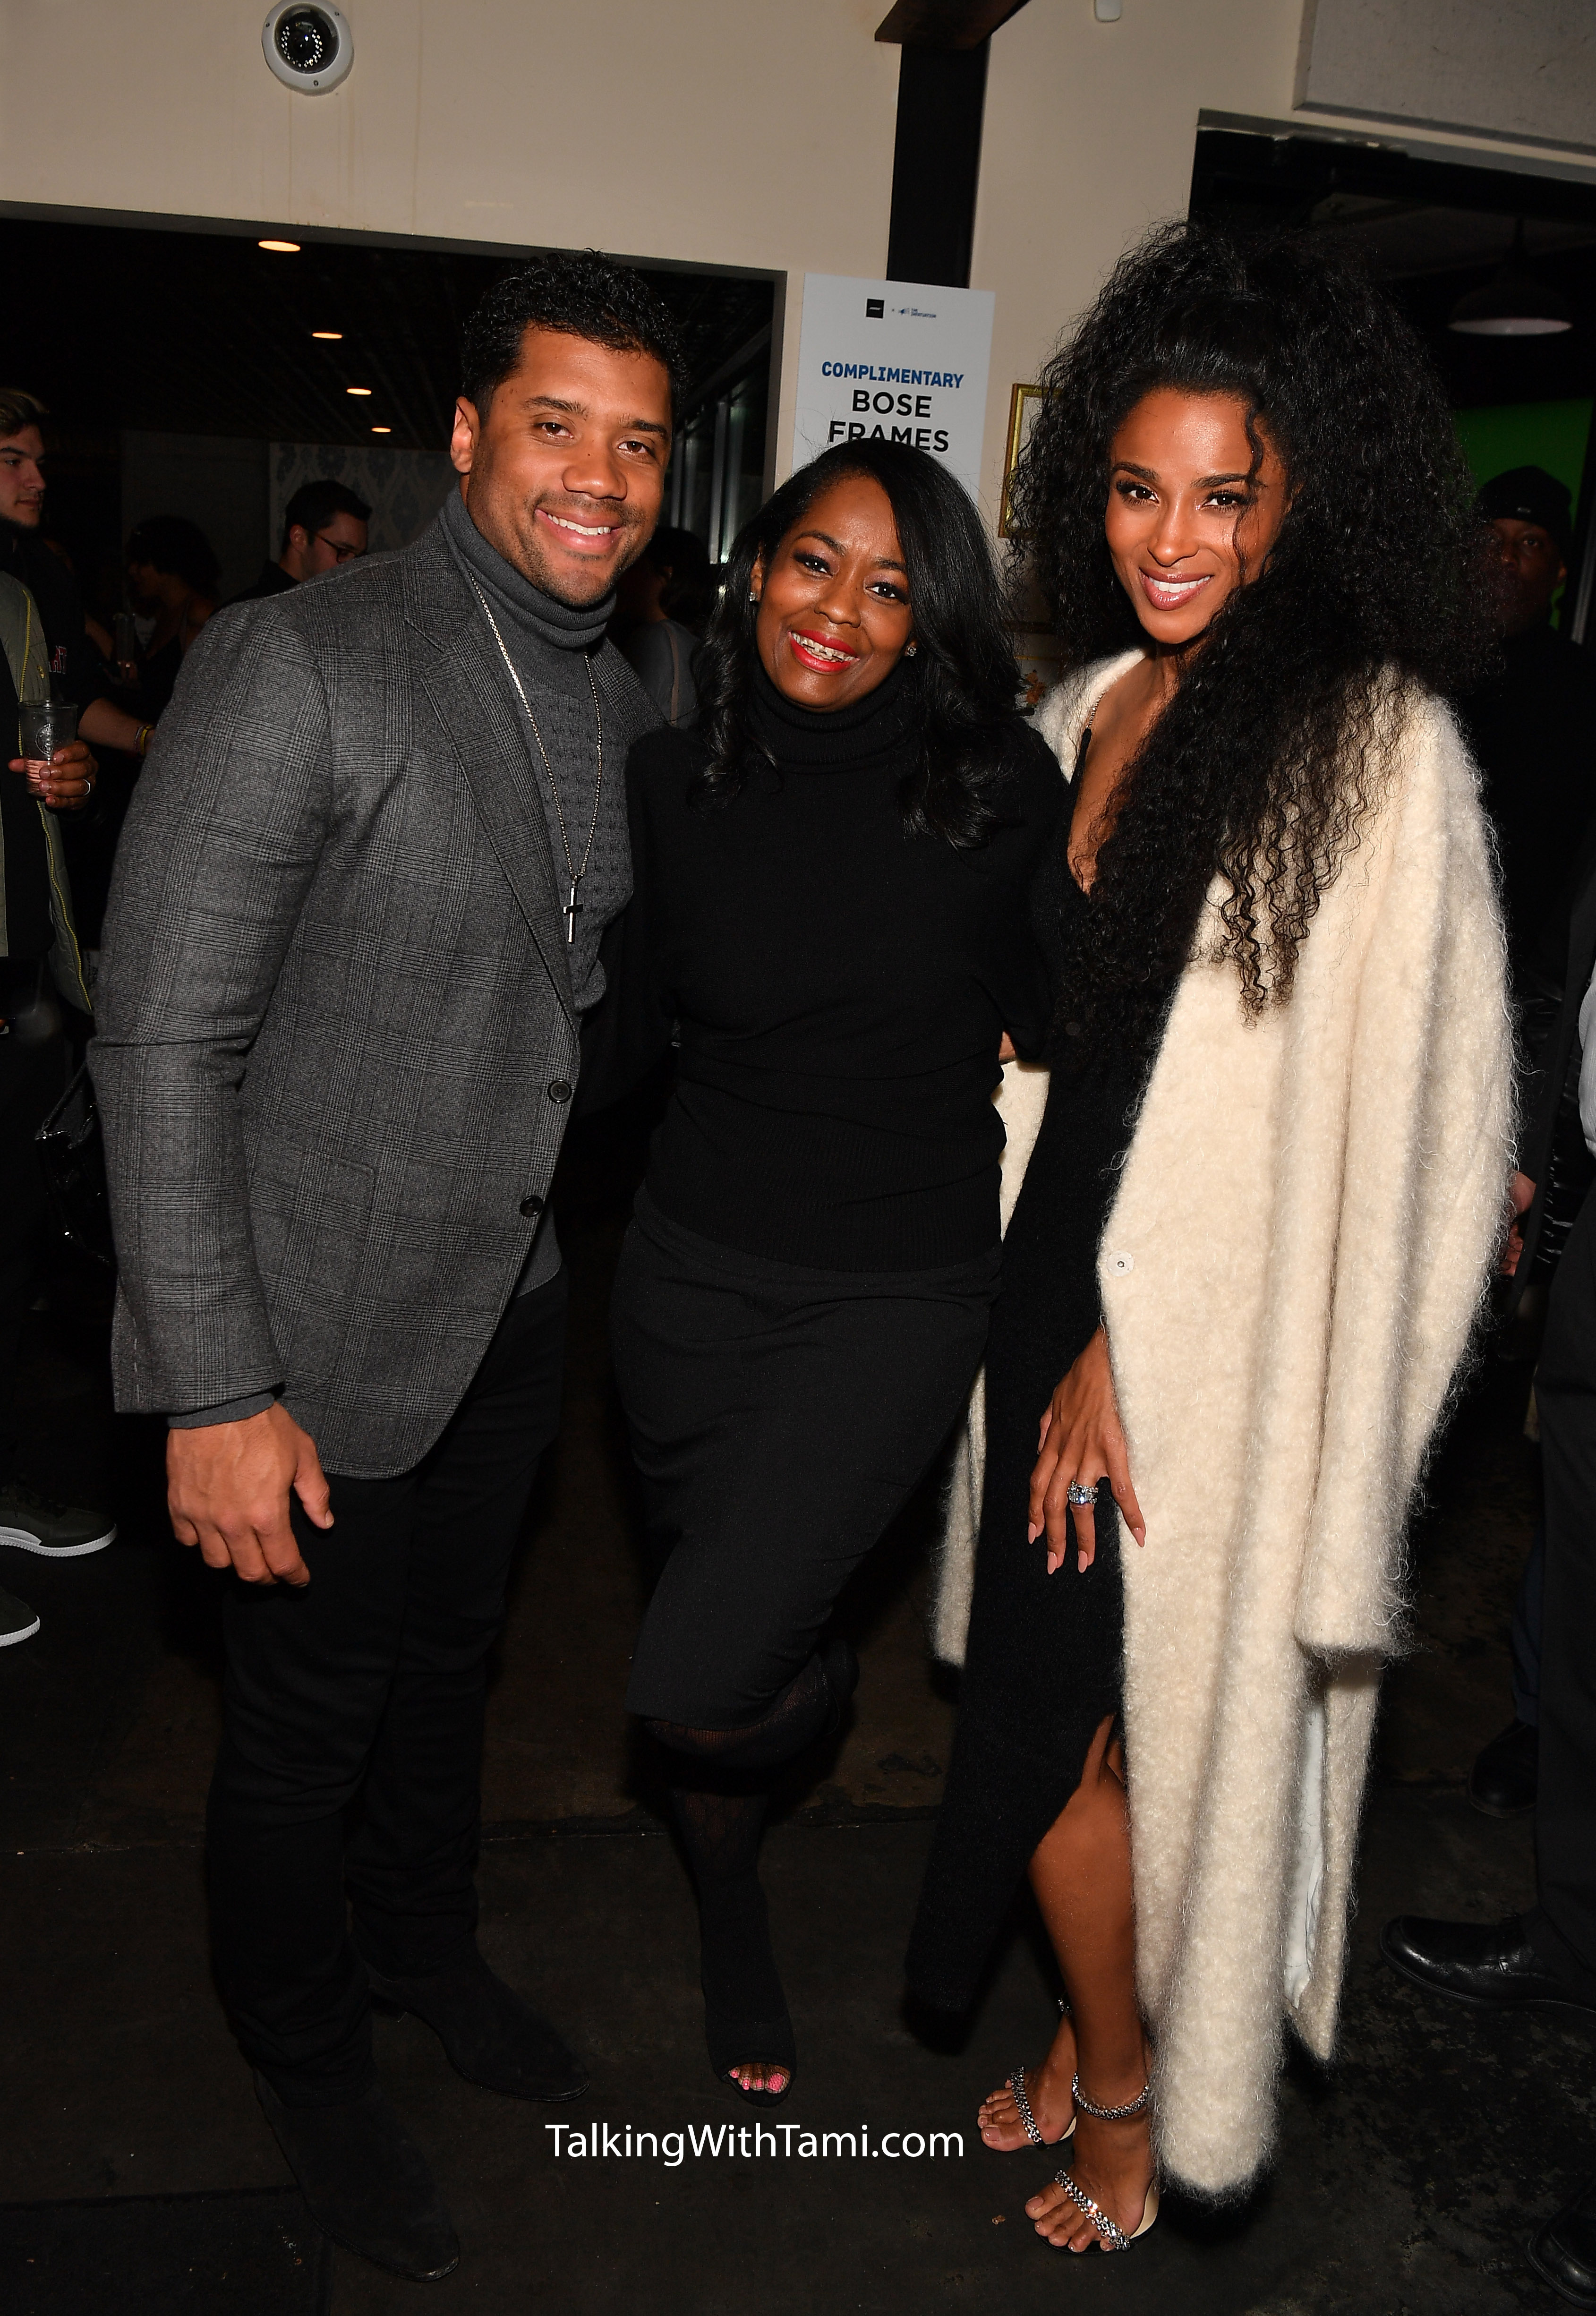 Bose Frames Audio Sunglass Launch In Atlanta Russell Wilson, Ciara And More Attend